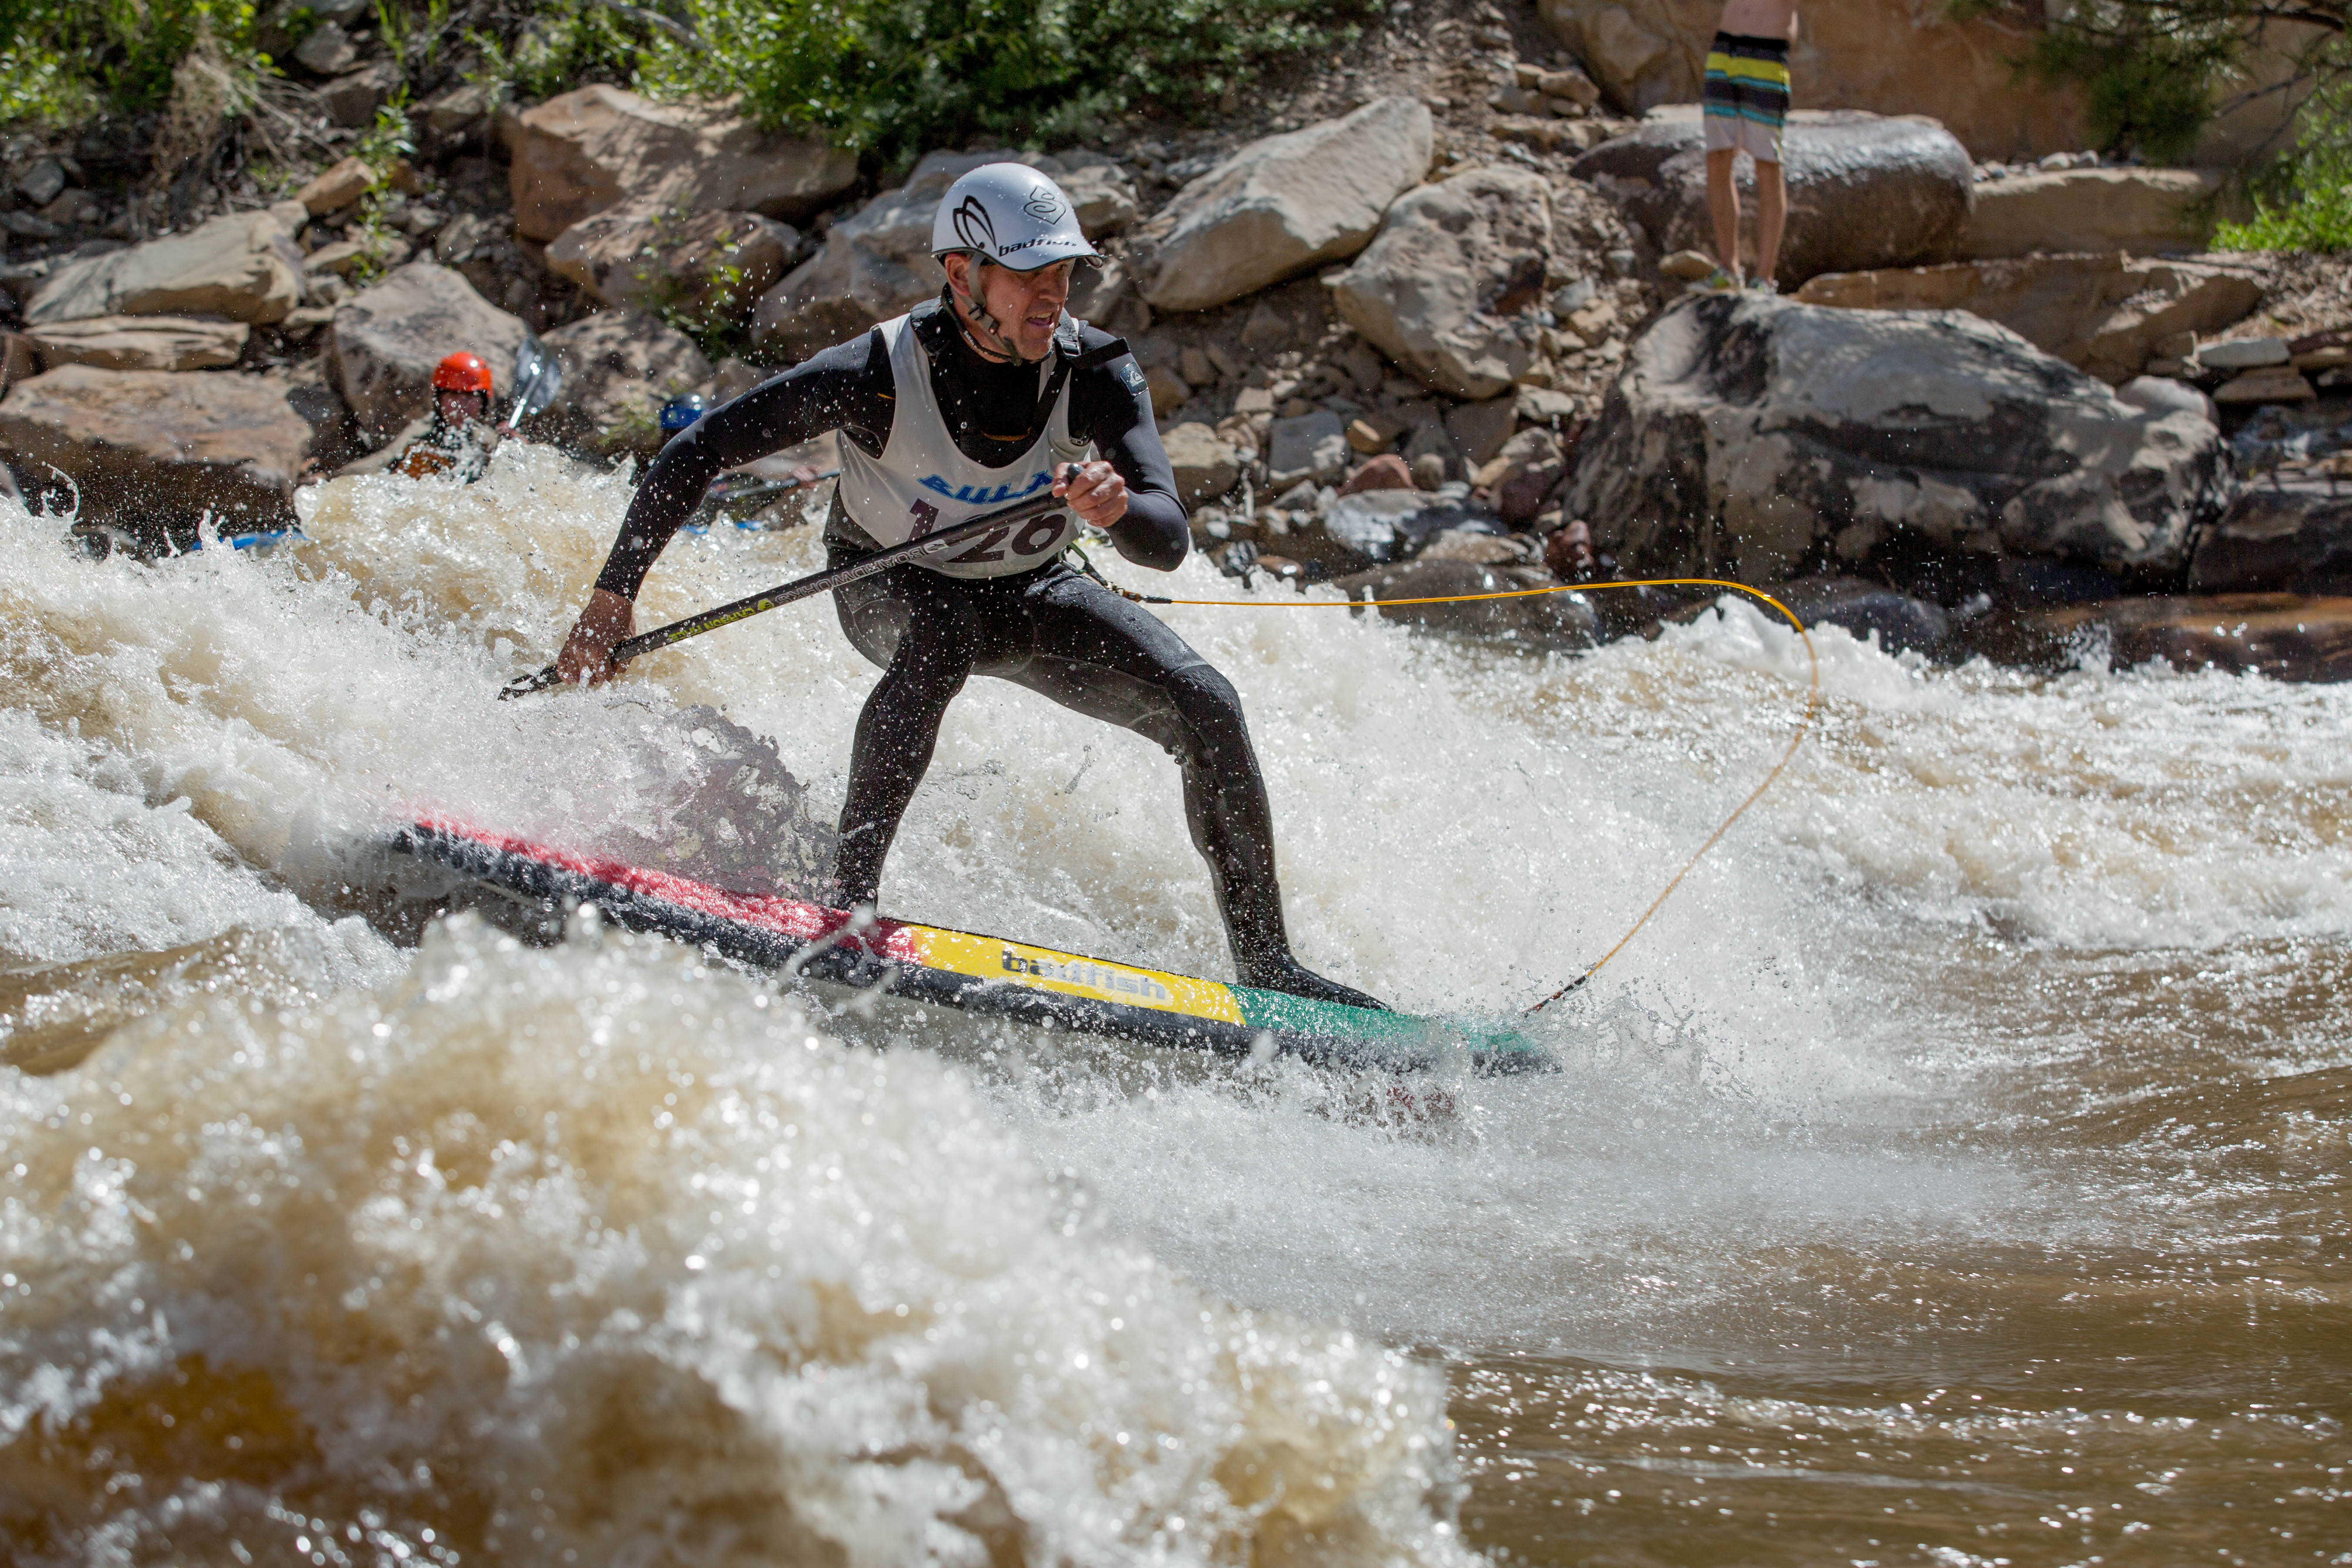 A Stand Up Paddle Boarder at the Durango Whitewater Park